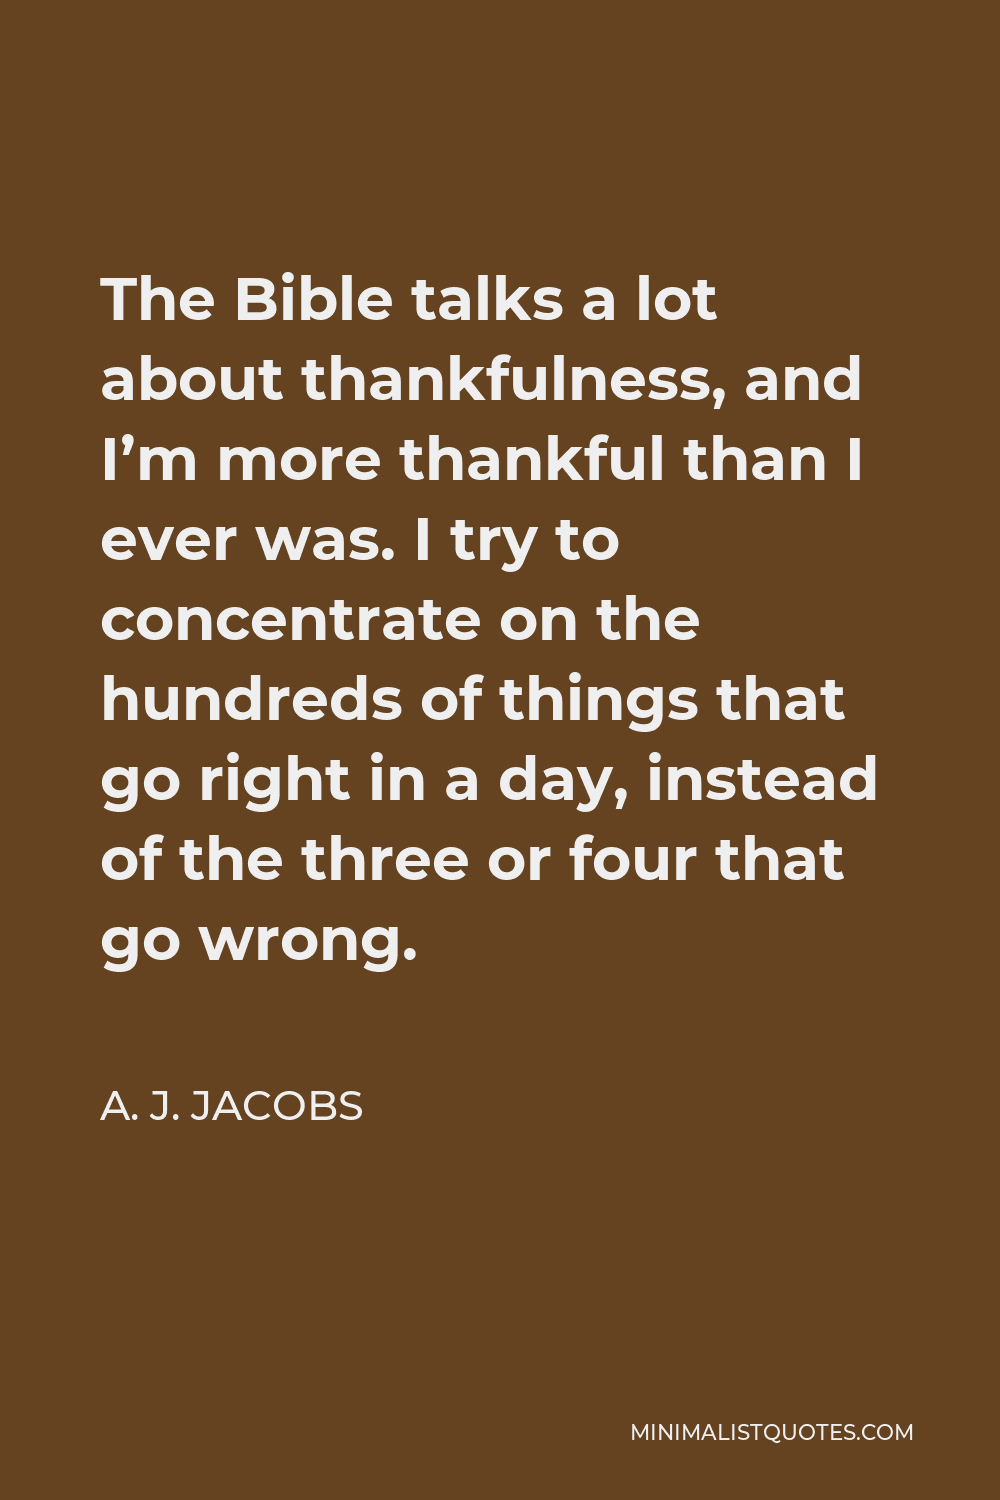 A. J. Jacobs Quote - The Bible talks a lot about thankfulness, and I’m more thankful than I ever was. I try to concentrate on the hundreds of things that go right in a day, instead of the three or four that go wrong.